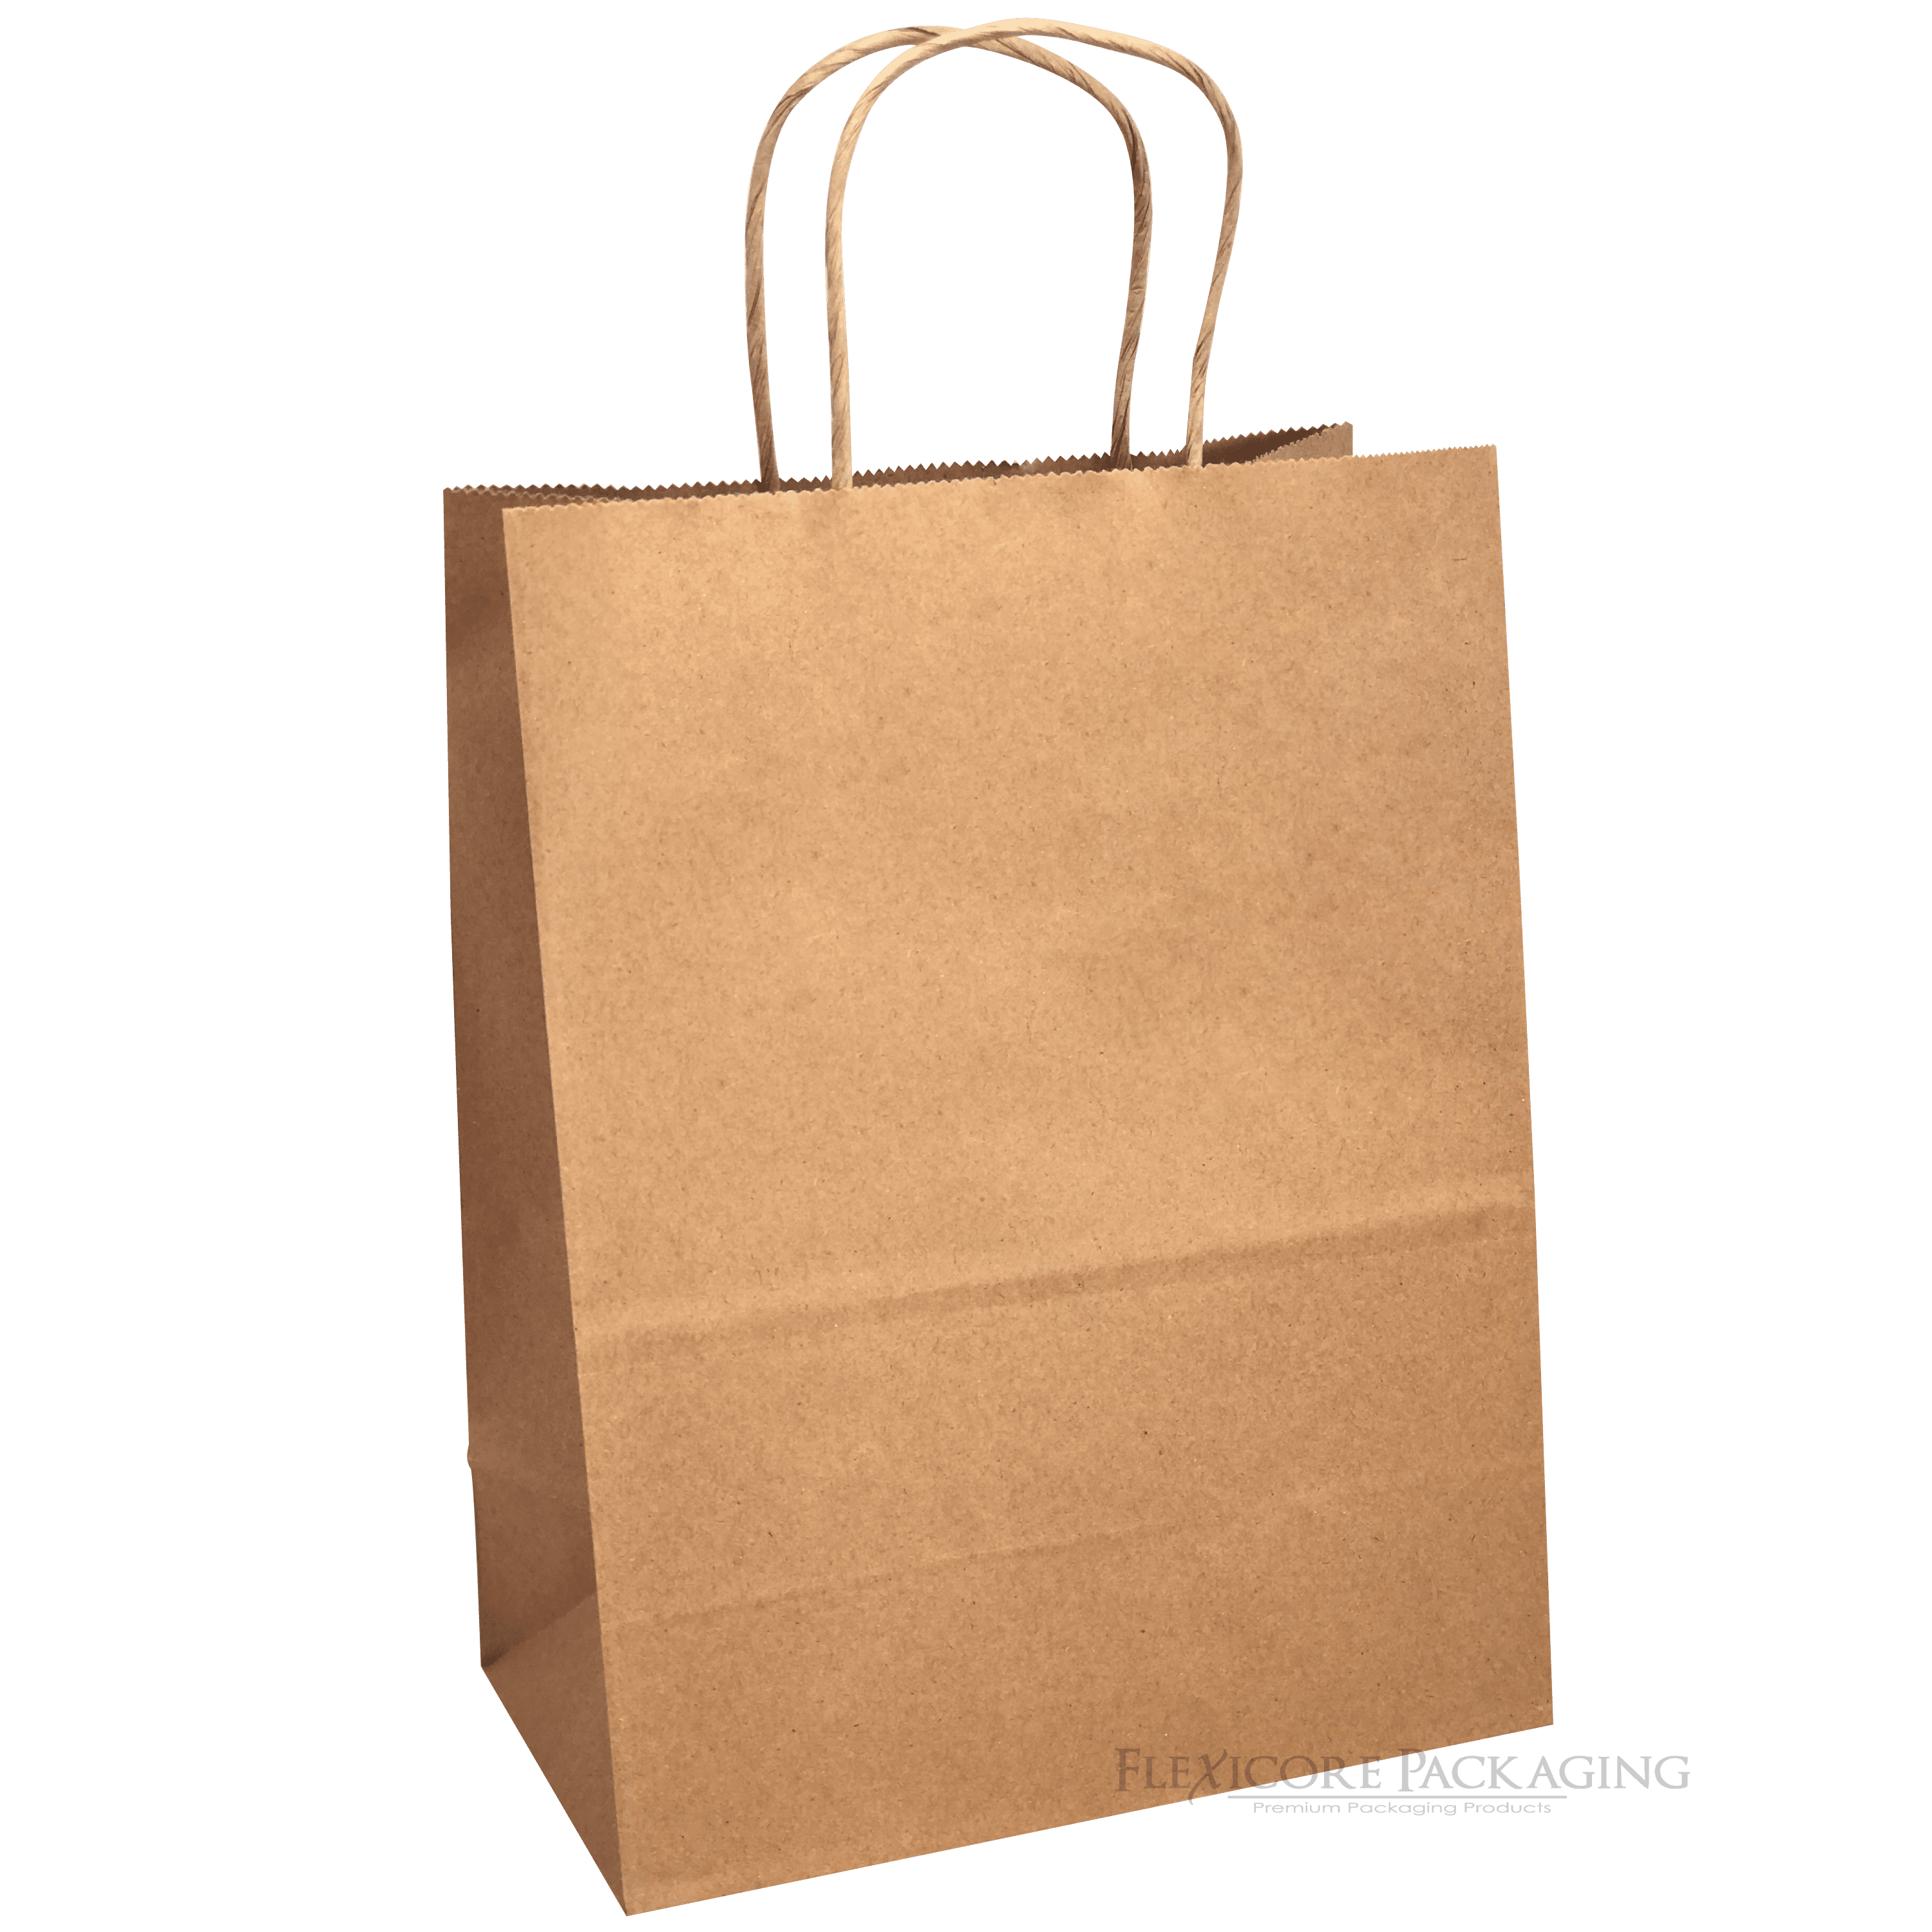 Merchandise Gift Bags Shopping 8"x4.75"x10.5 White Kraft Paper Bags Party